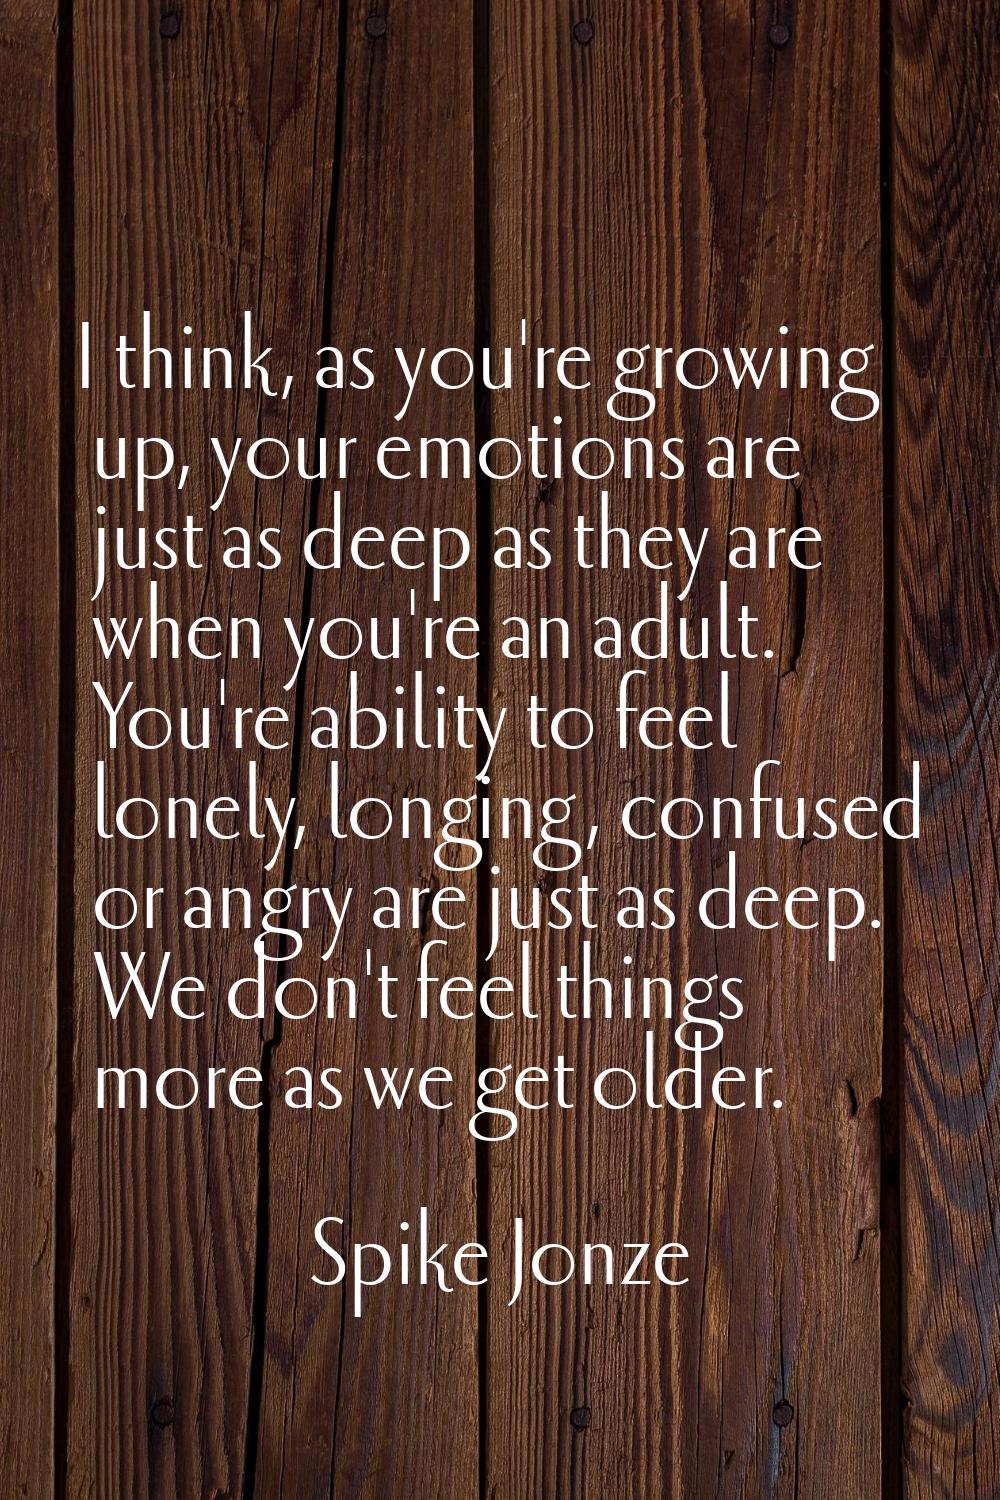 I think, as you're growing up, your emotions are just as deep as they are when you're an adult. You